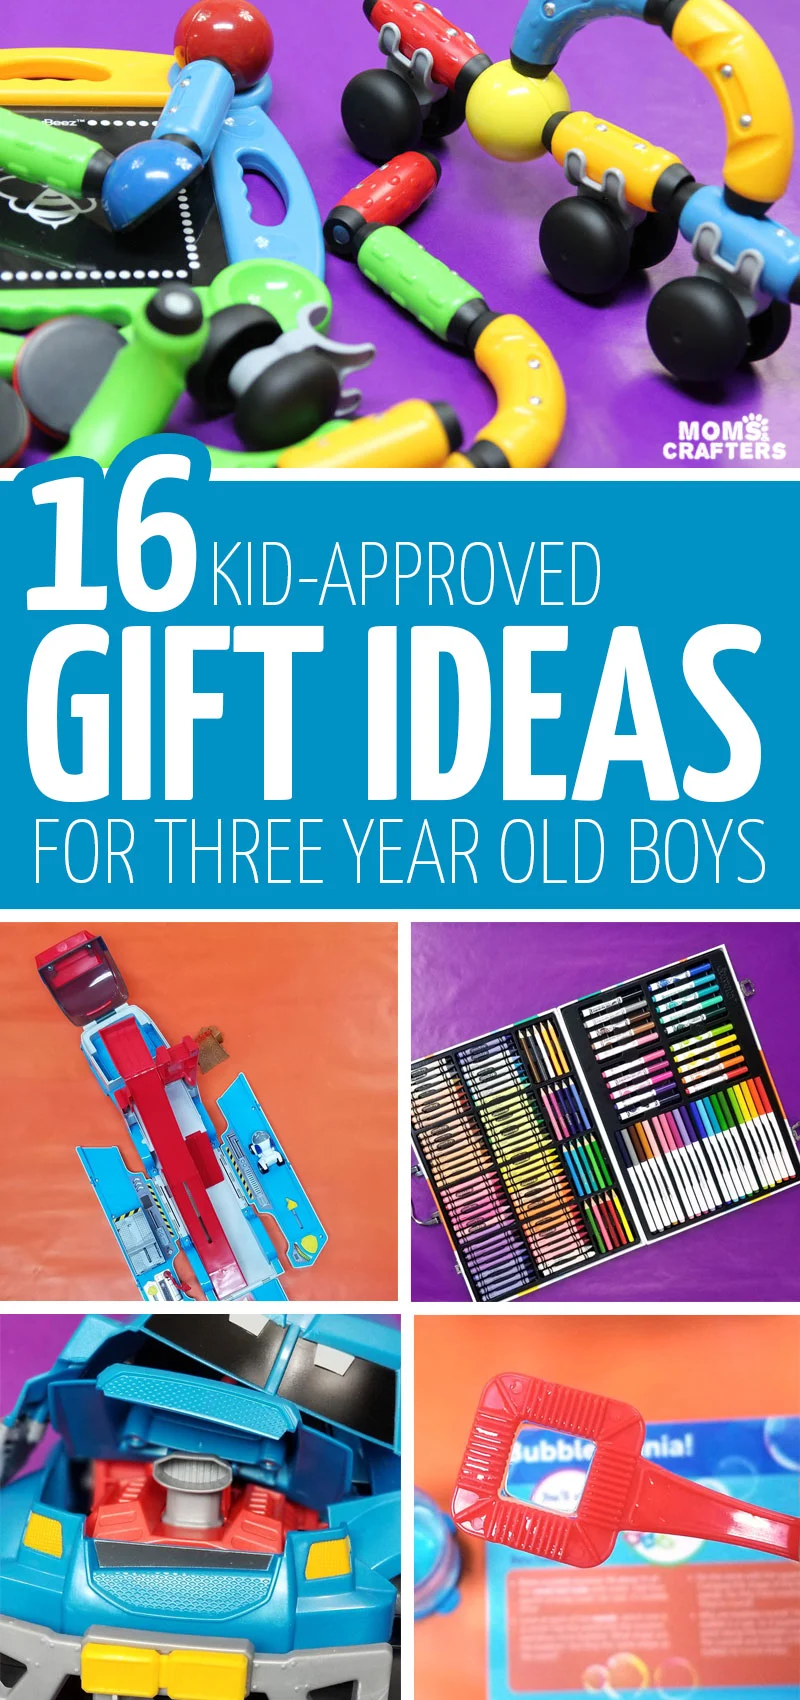 If you're looking for educational play gifts for kids ages 3-6, this list of the best birthday gifts for 3 year old boys is perfect for Christmas and Hanukkah too! They come in every price range so you'll find something cheap and affordable, or grand and dream-fulfilling!